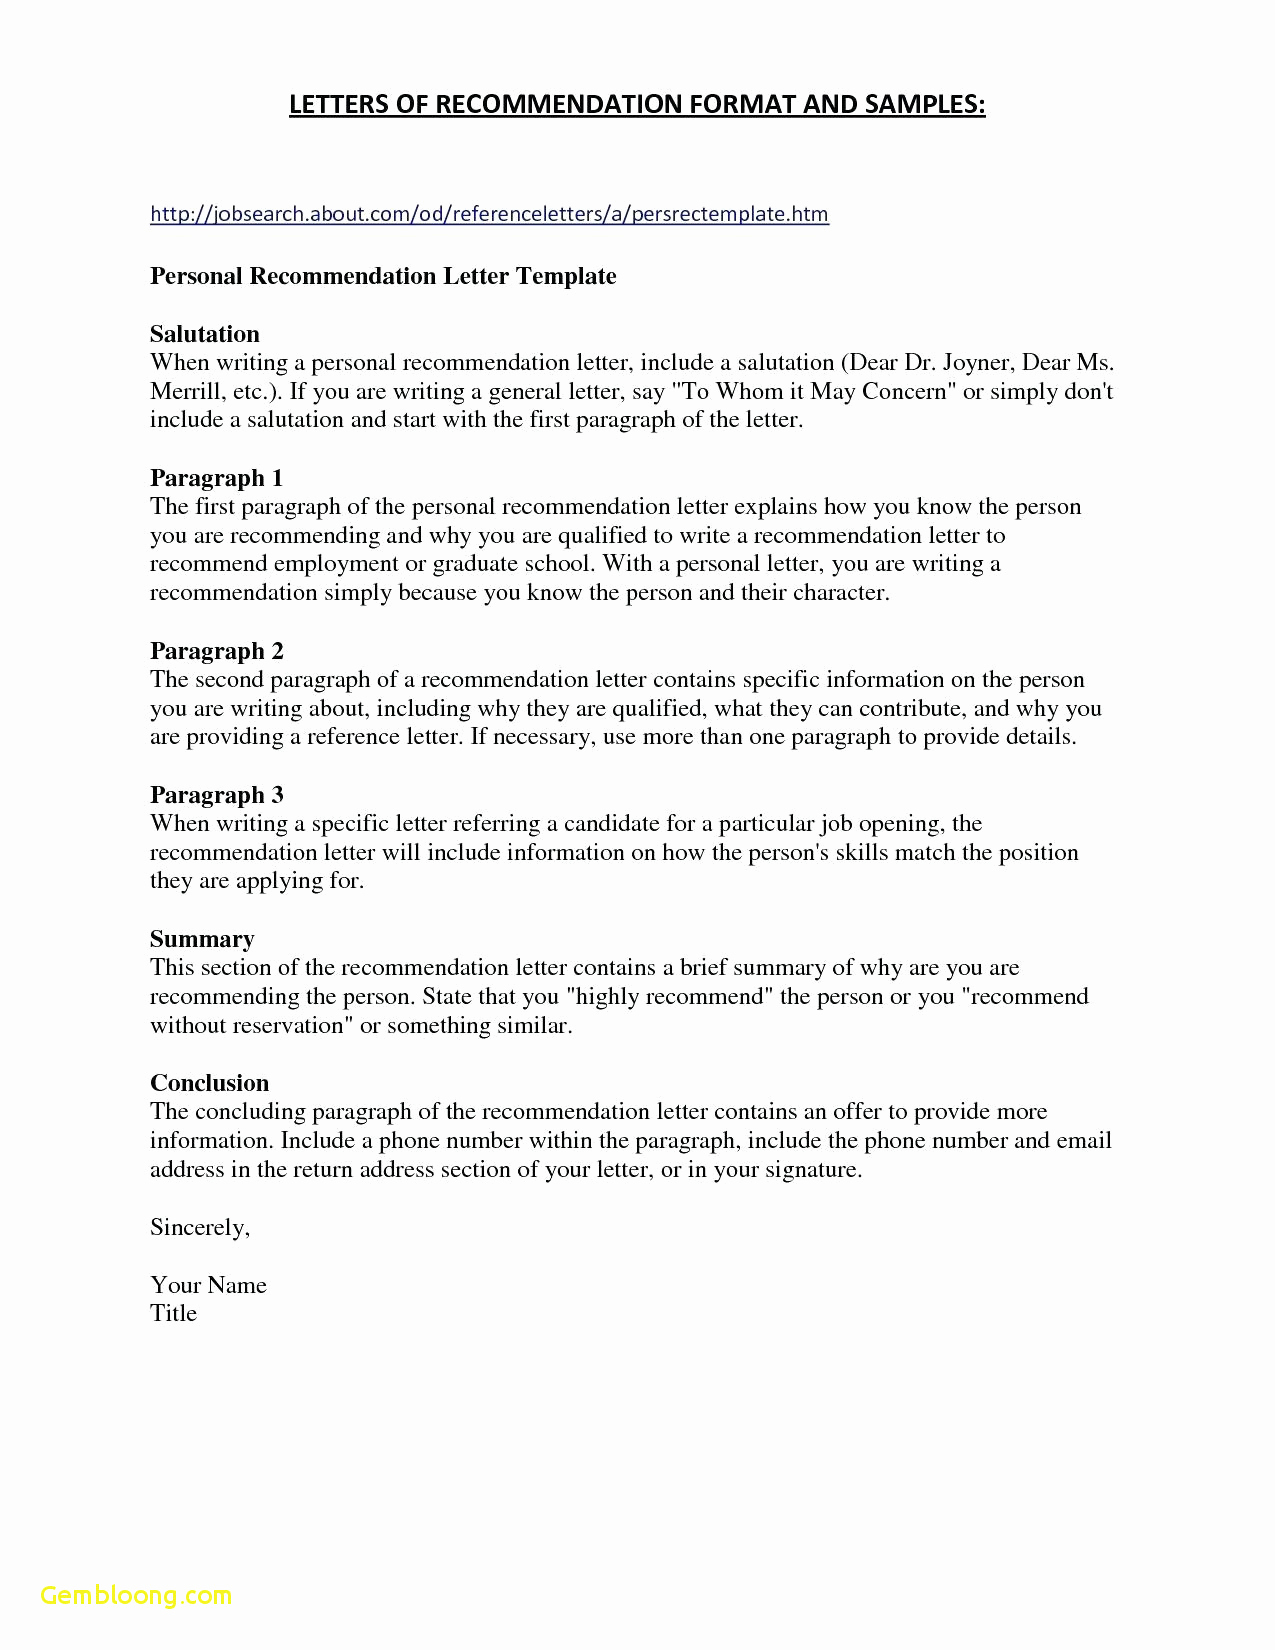 Writing Your Own Letter Of Recommendation Template - Personal Re Mendation Letter for Employment Lovely References for